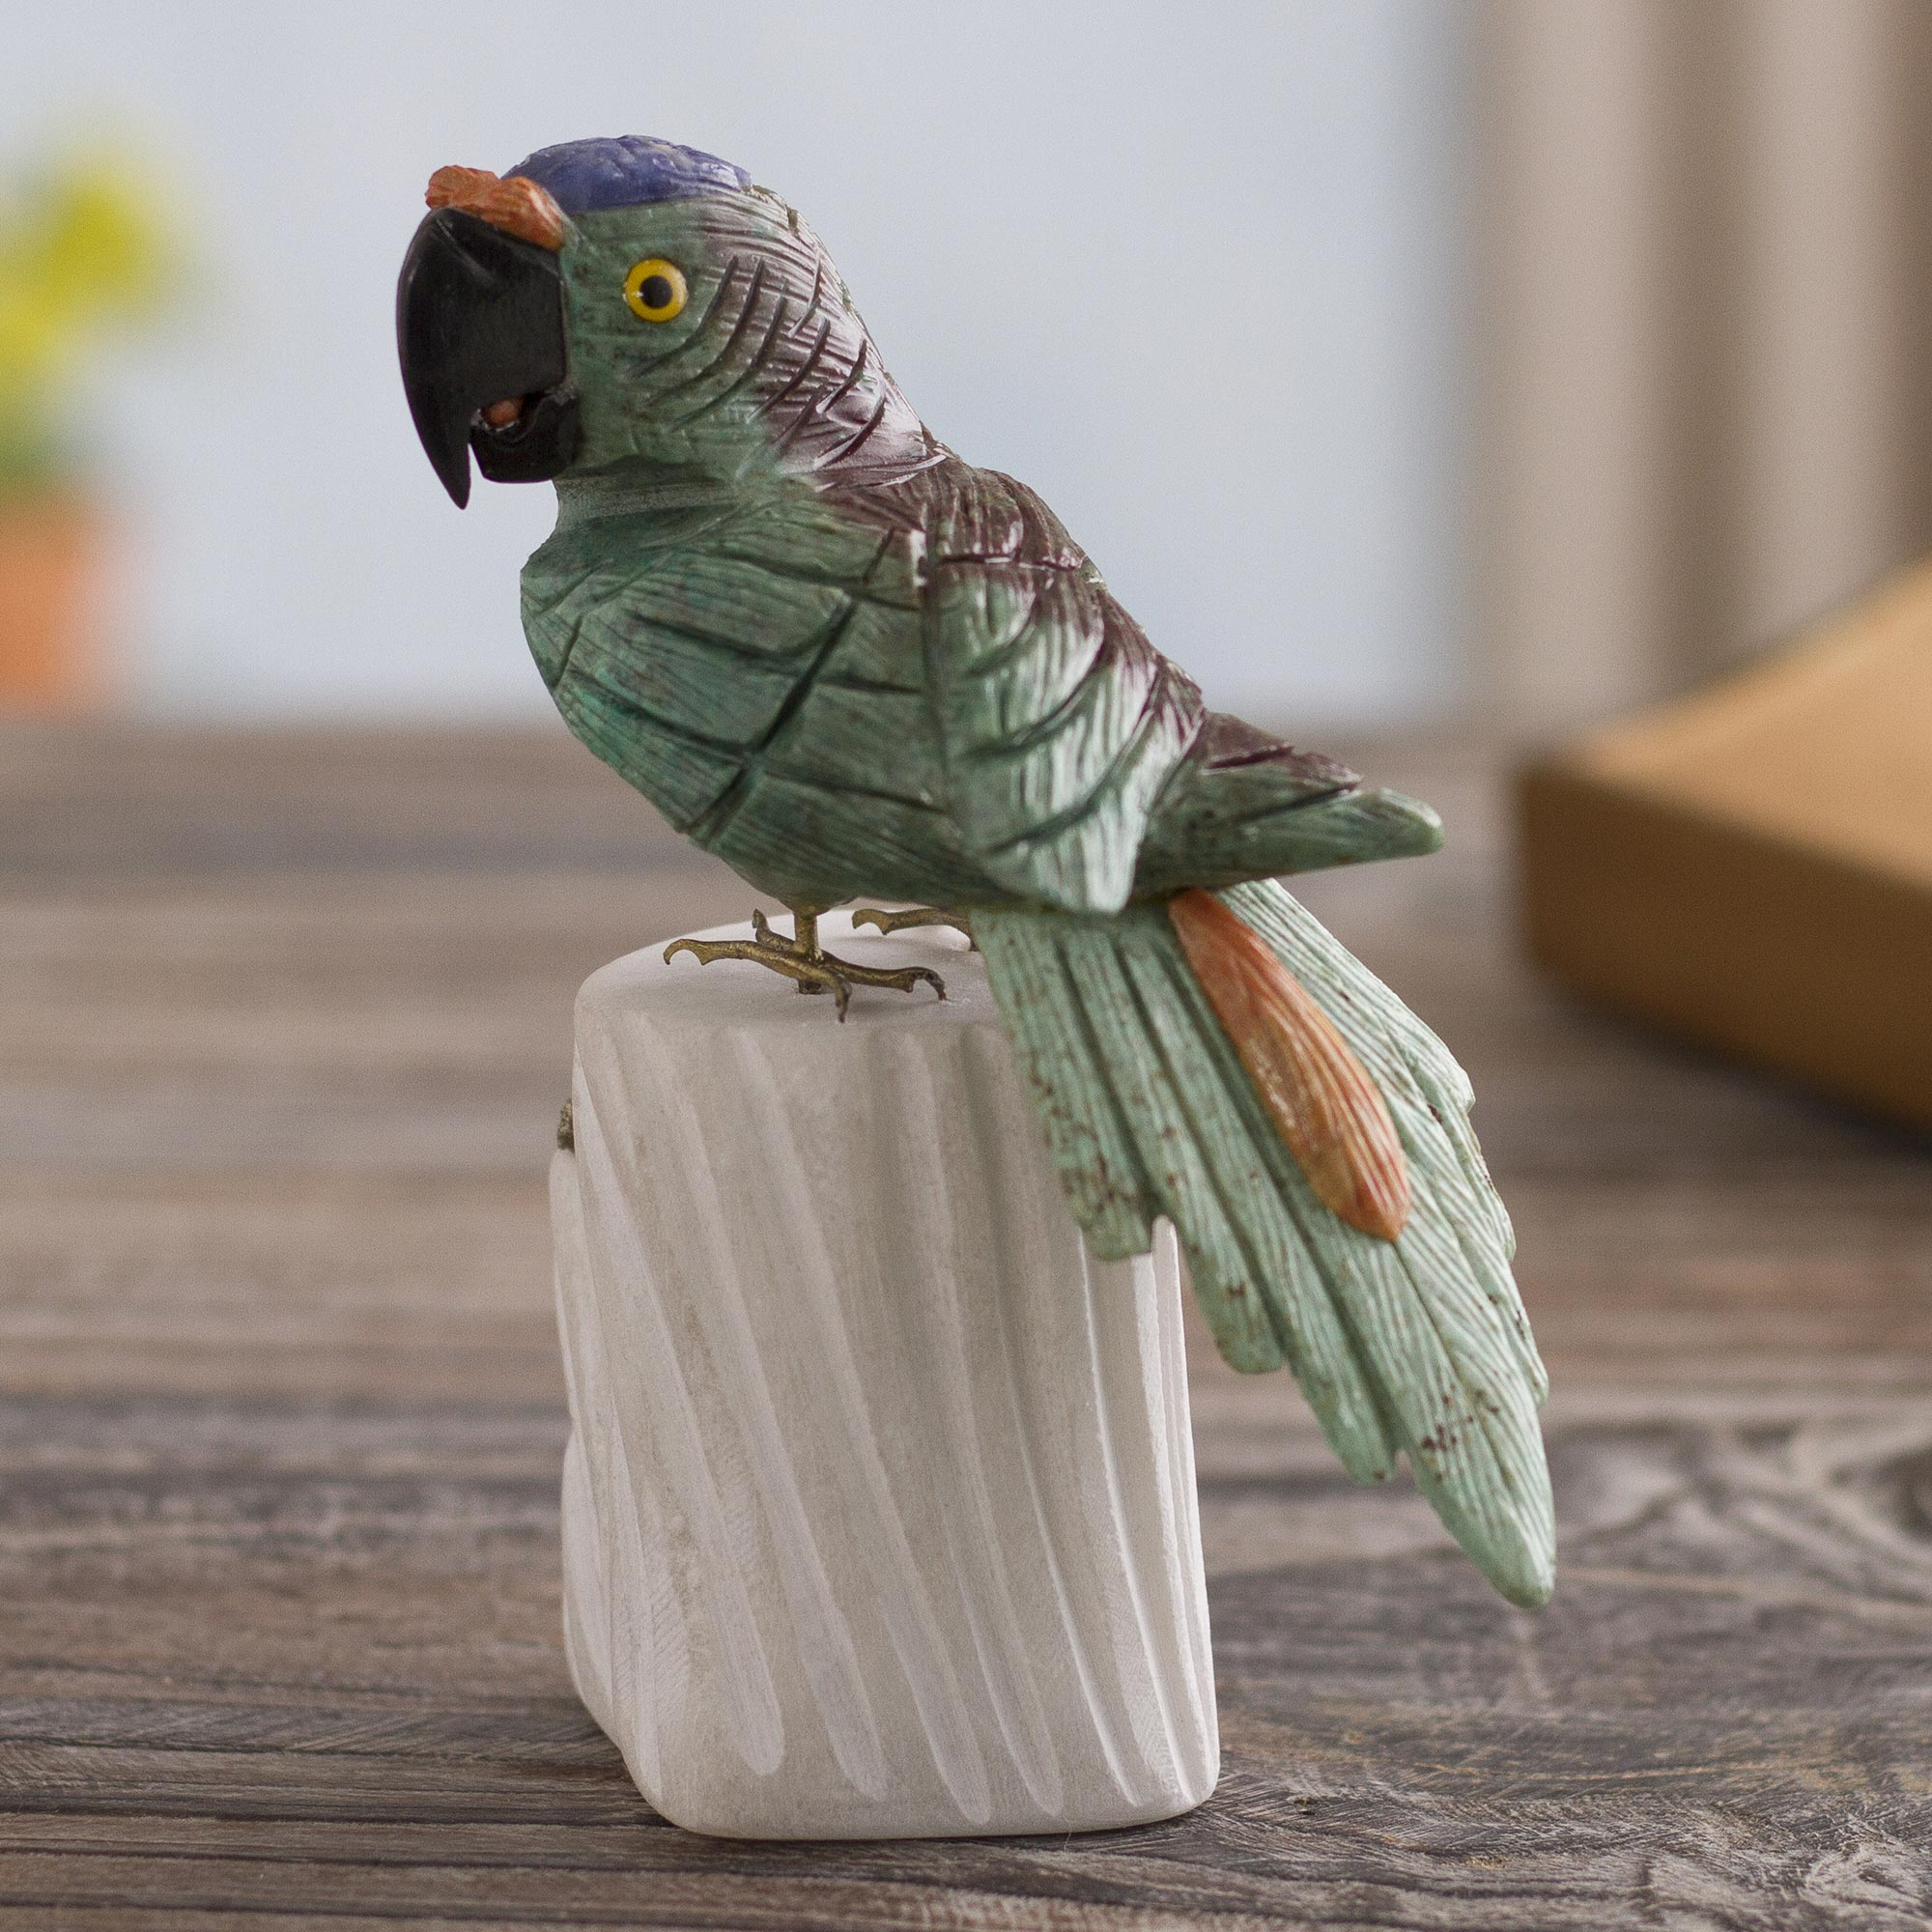 What Is The Symbolism And Meanings Behind Gemstone Birds And Animals?